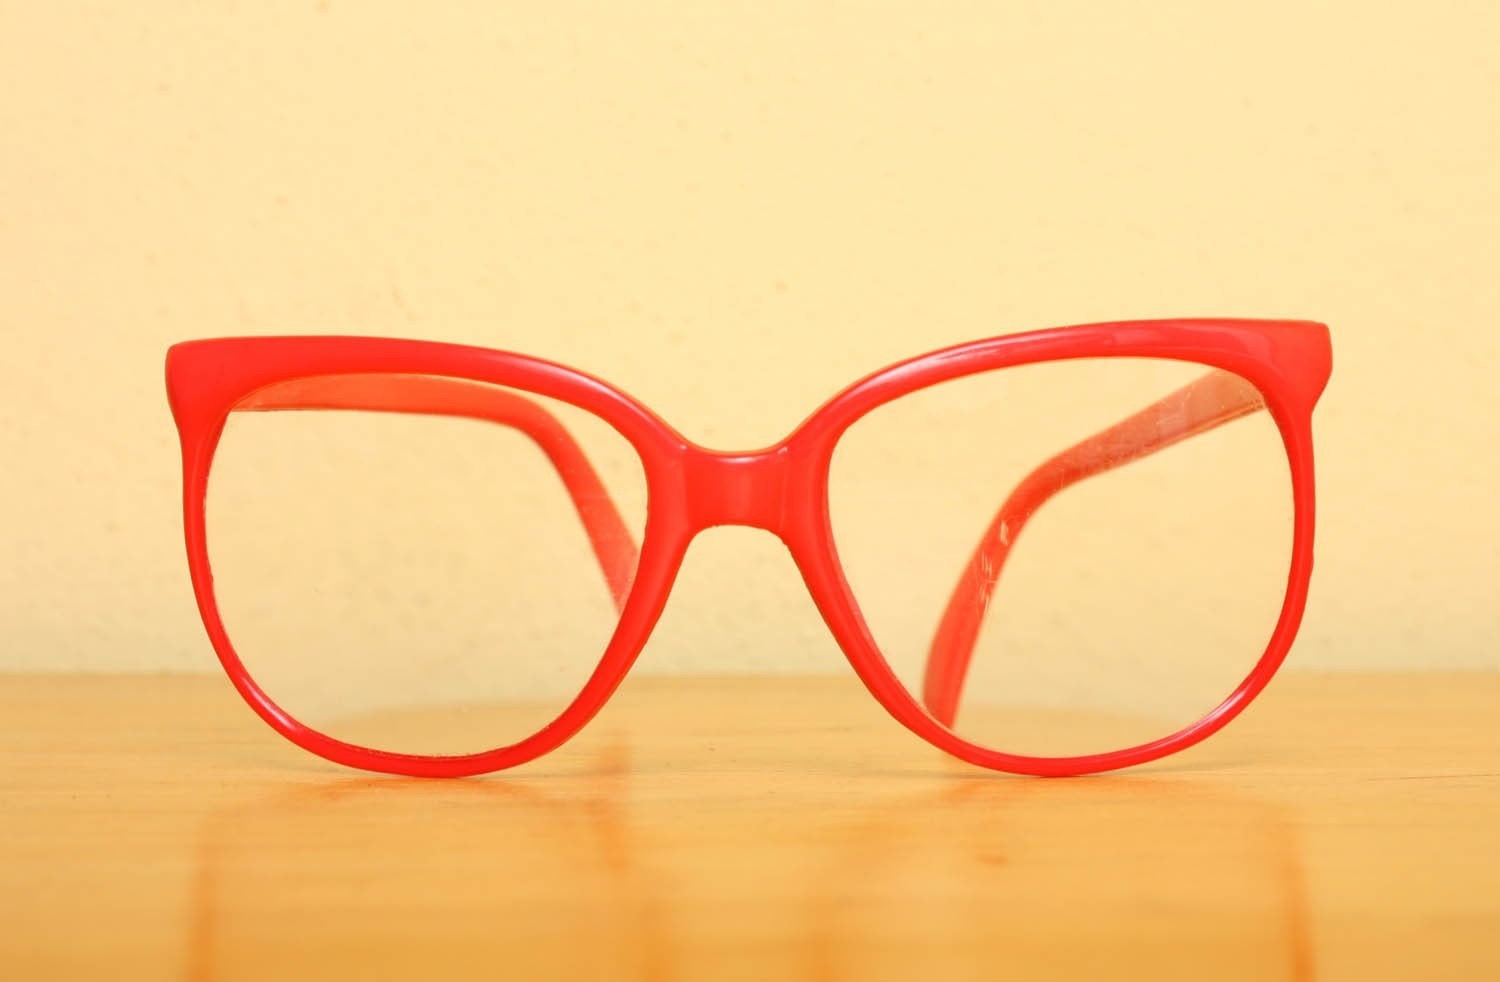 Vintage 1980s Oversized Plastic Glasses in Bright Pinkish Coral Plastic